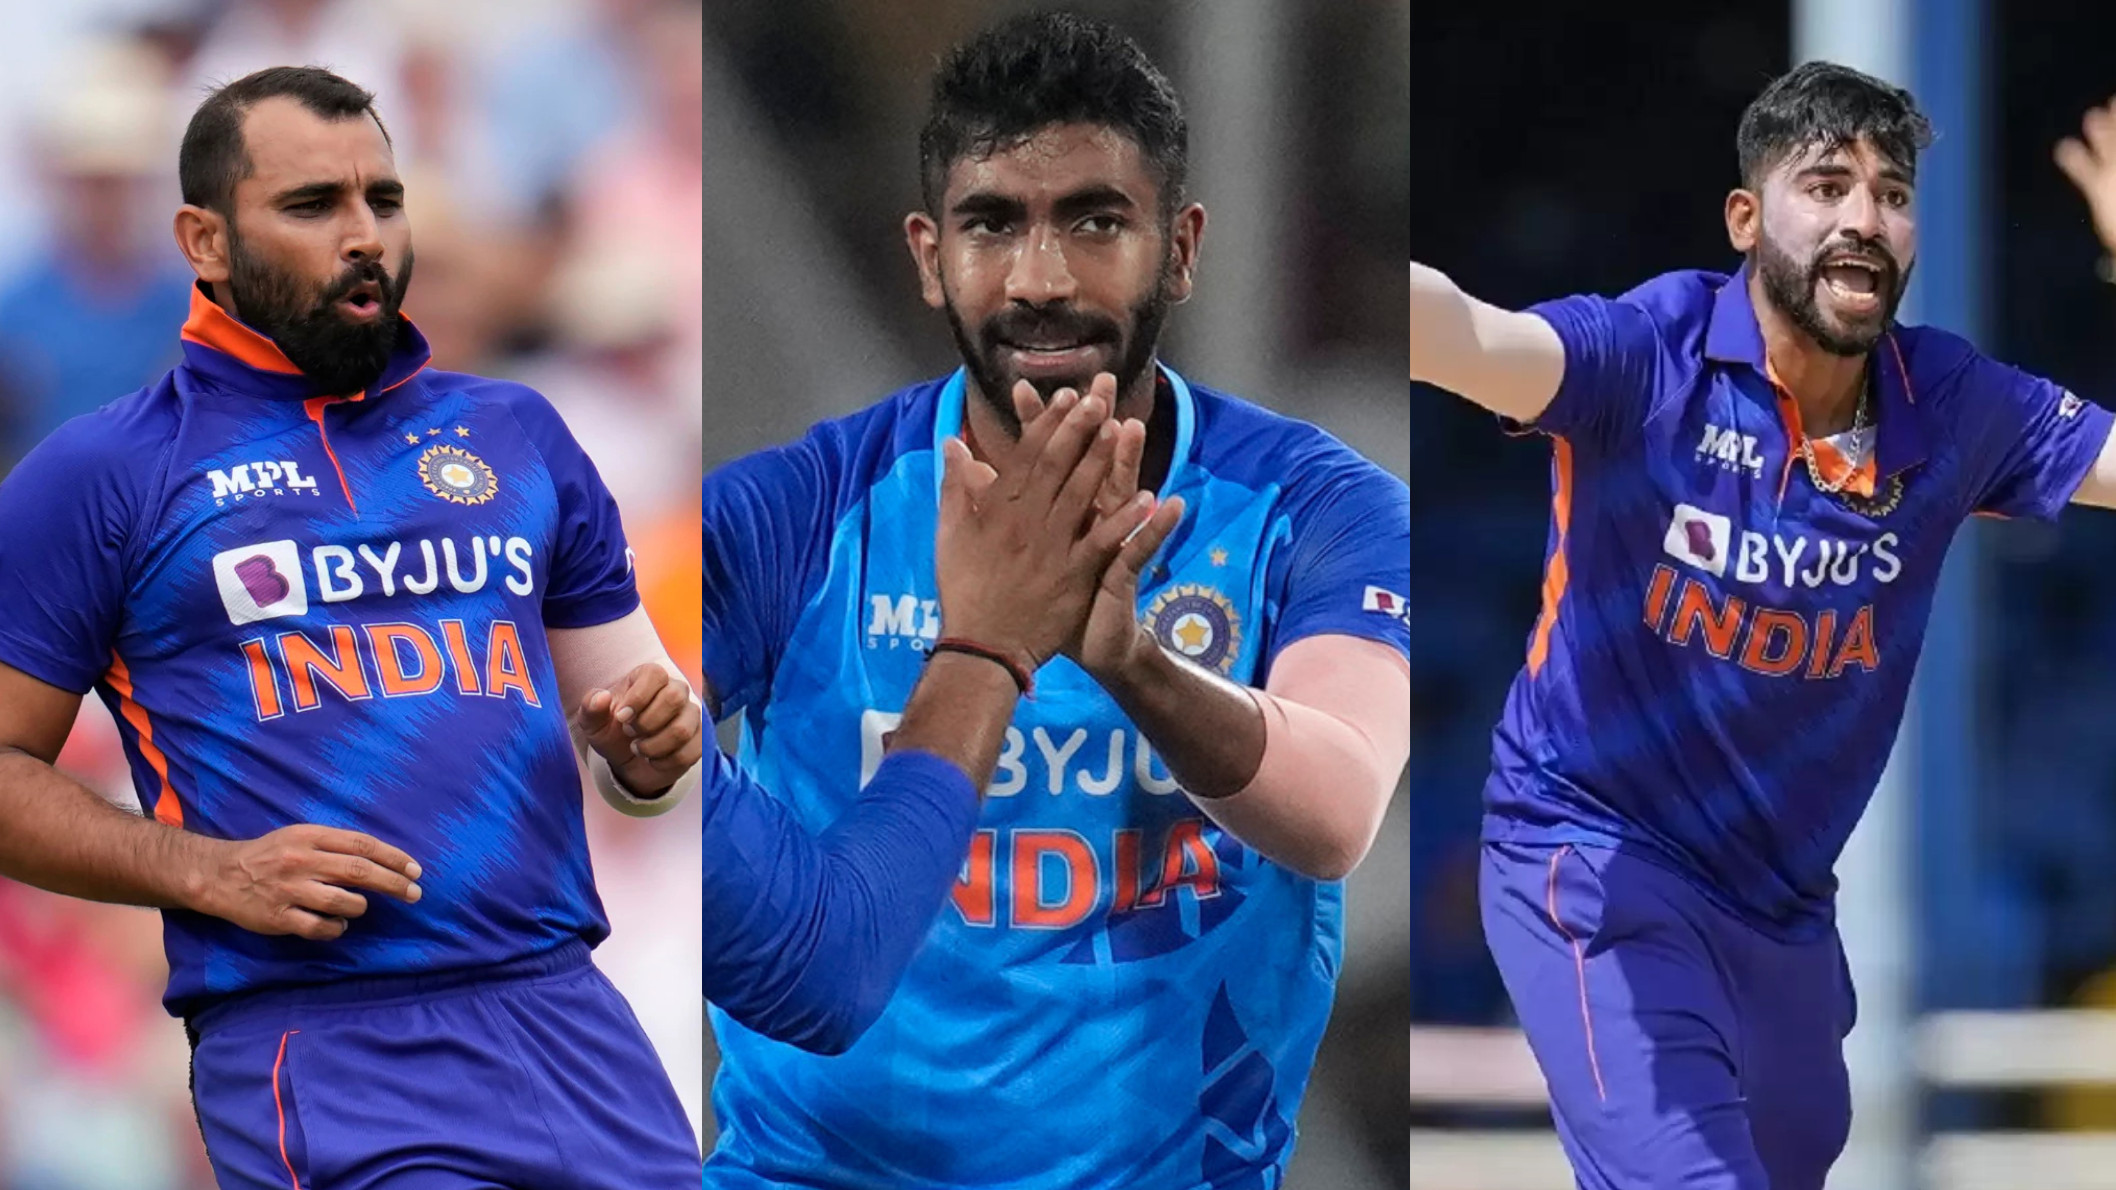 Shami set to replace Bumrah for T20 World Cup 2022; Siraj to be replacement for SA T20Is – Report